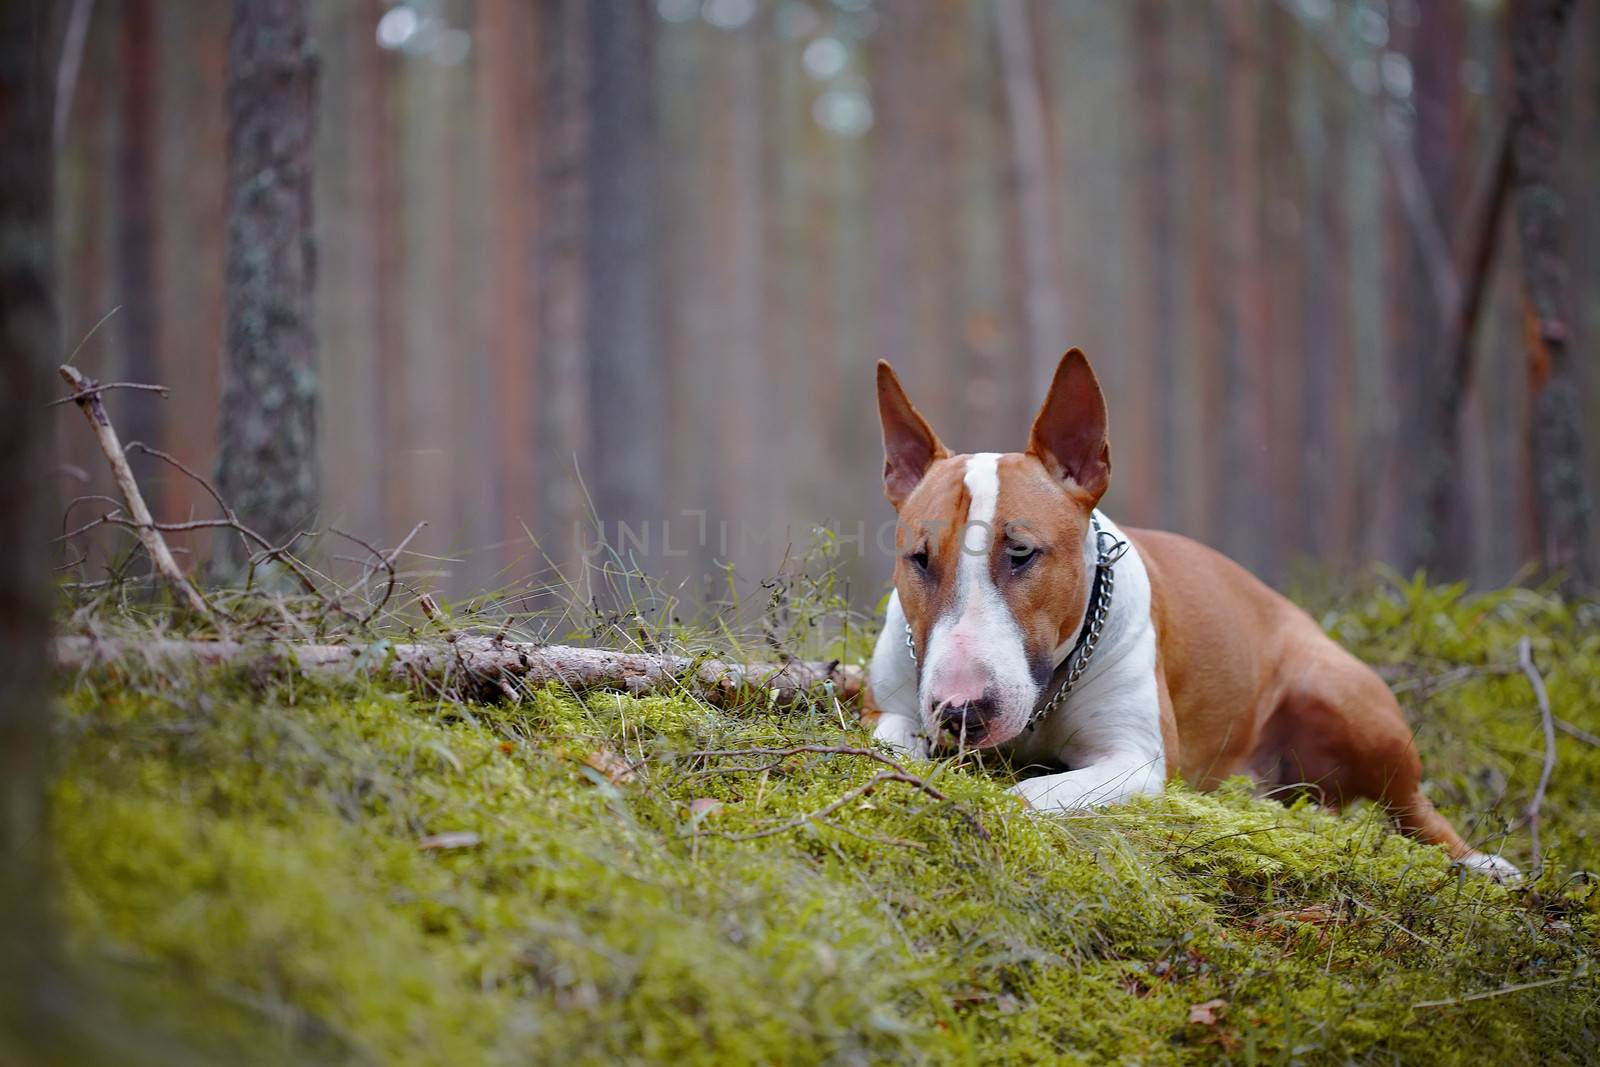 English bull terrier. Thoroughbred dog. Canine friend. Red dog. Bull terrier in the wood.